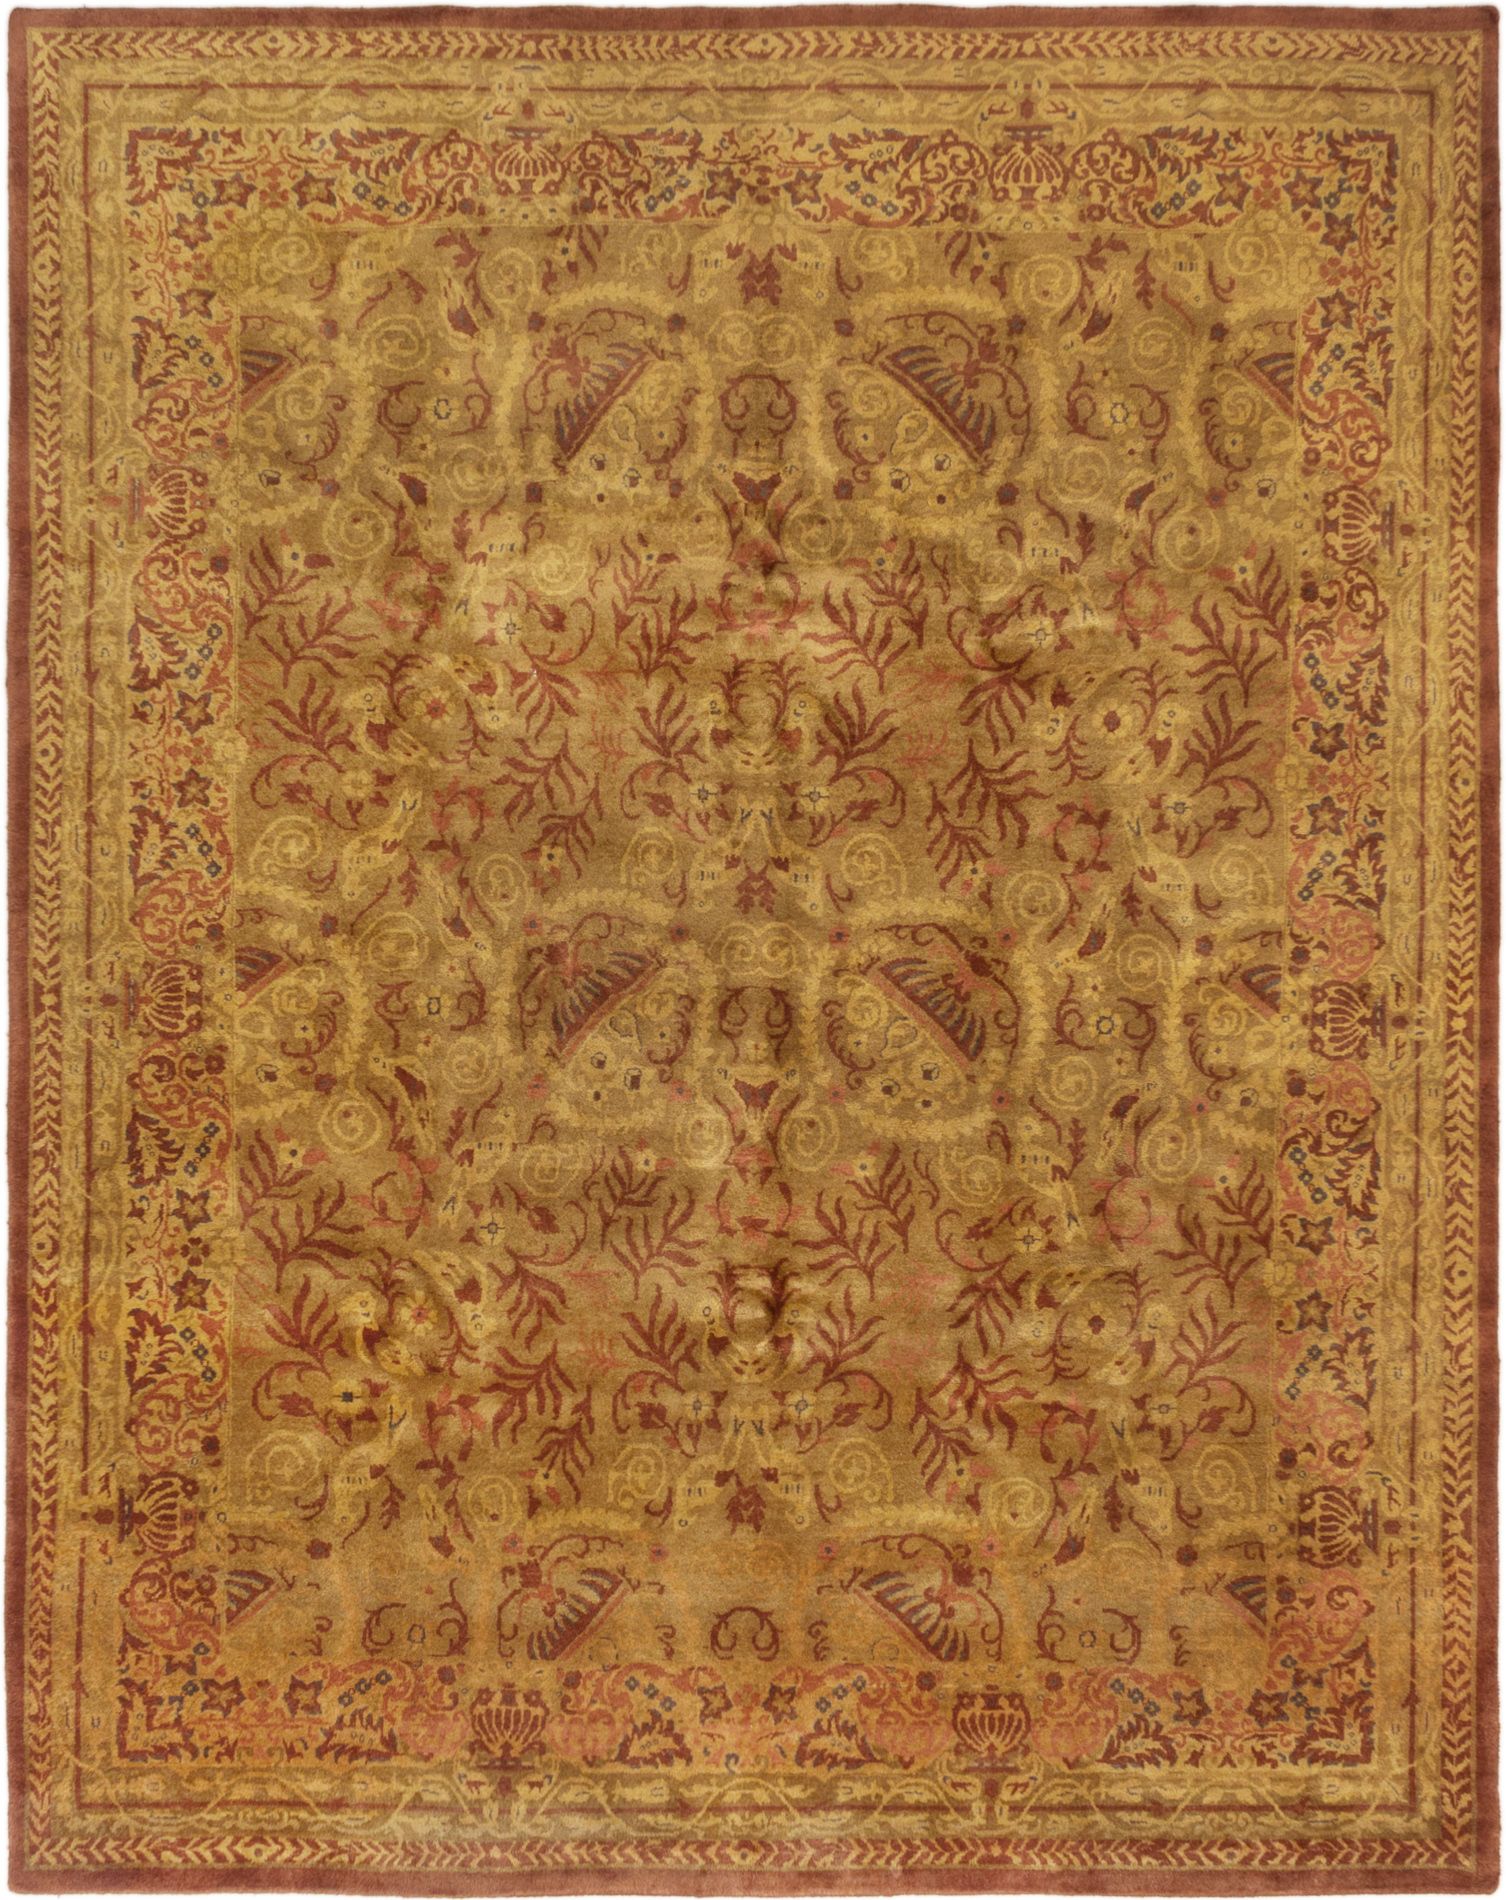 Hand-knotted Karma Brown Wool Rug 7'9" x 9'6" Size: 7'9" x 9'6"  